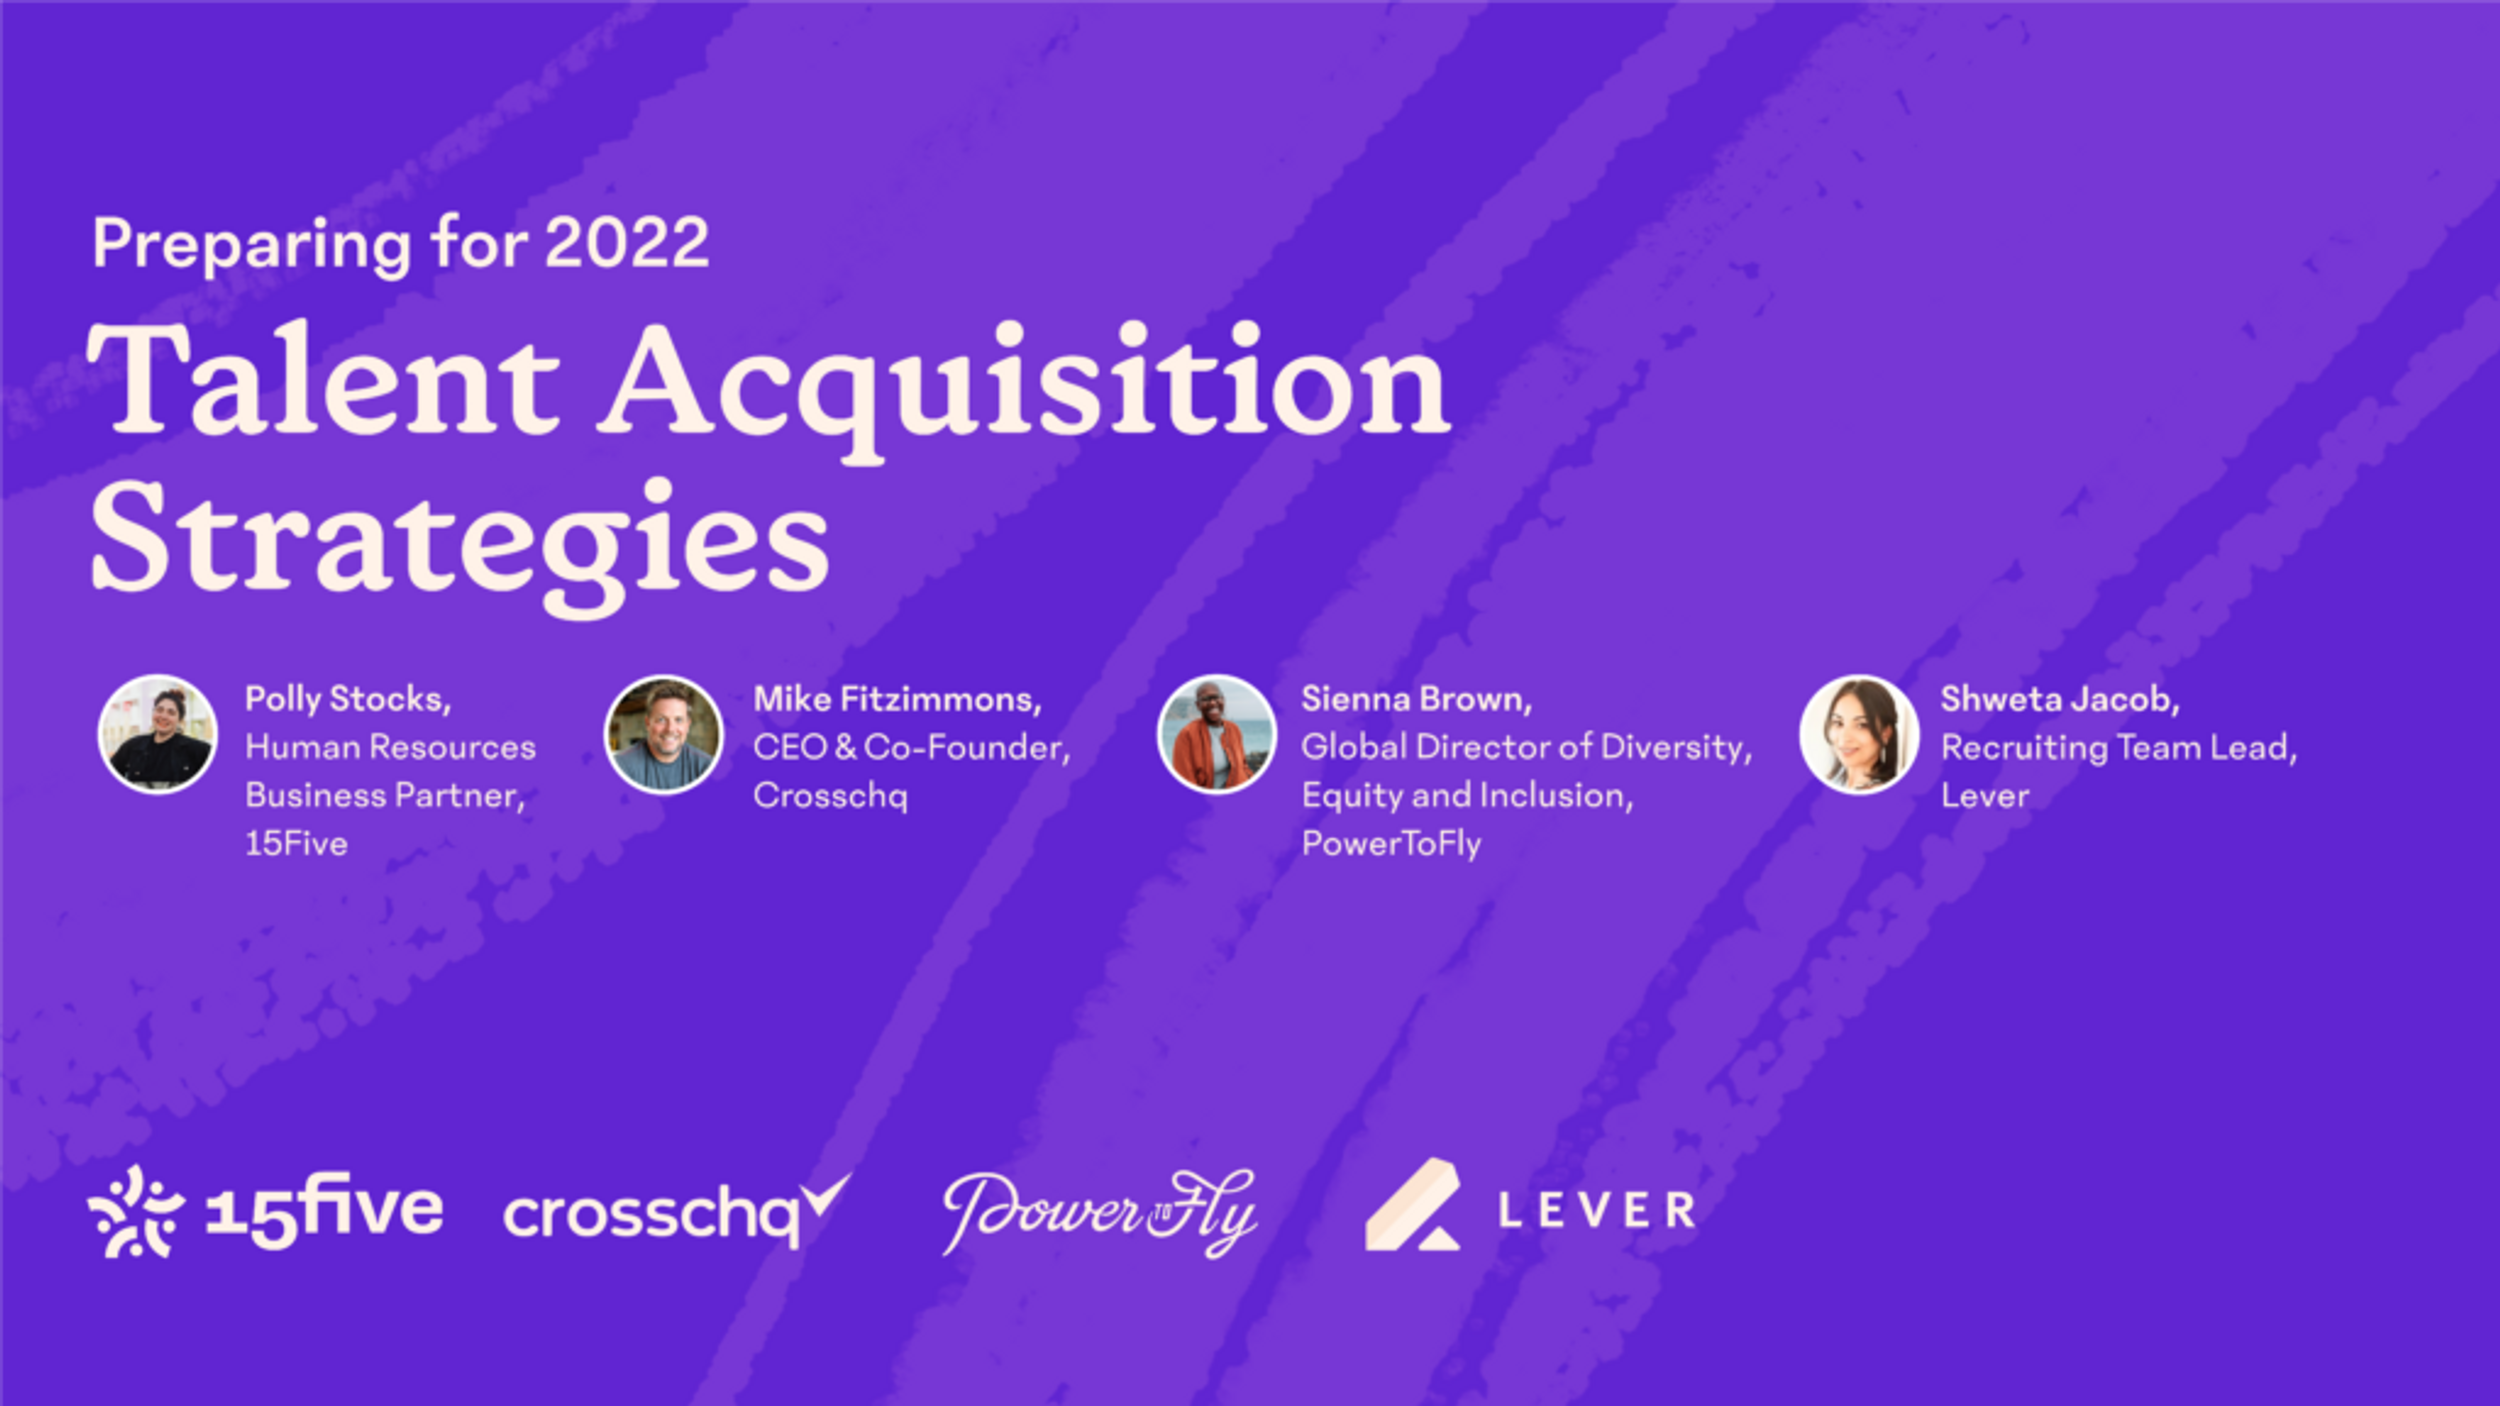 Preparing for 2022: Talent Acquisition Strategies